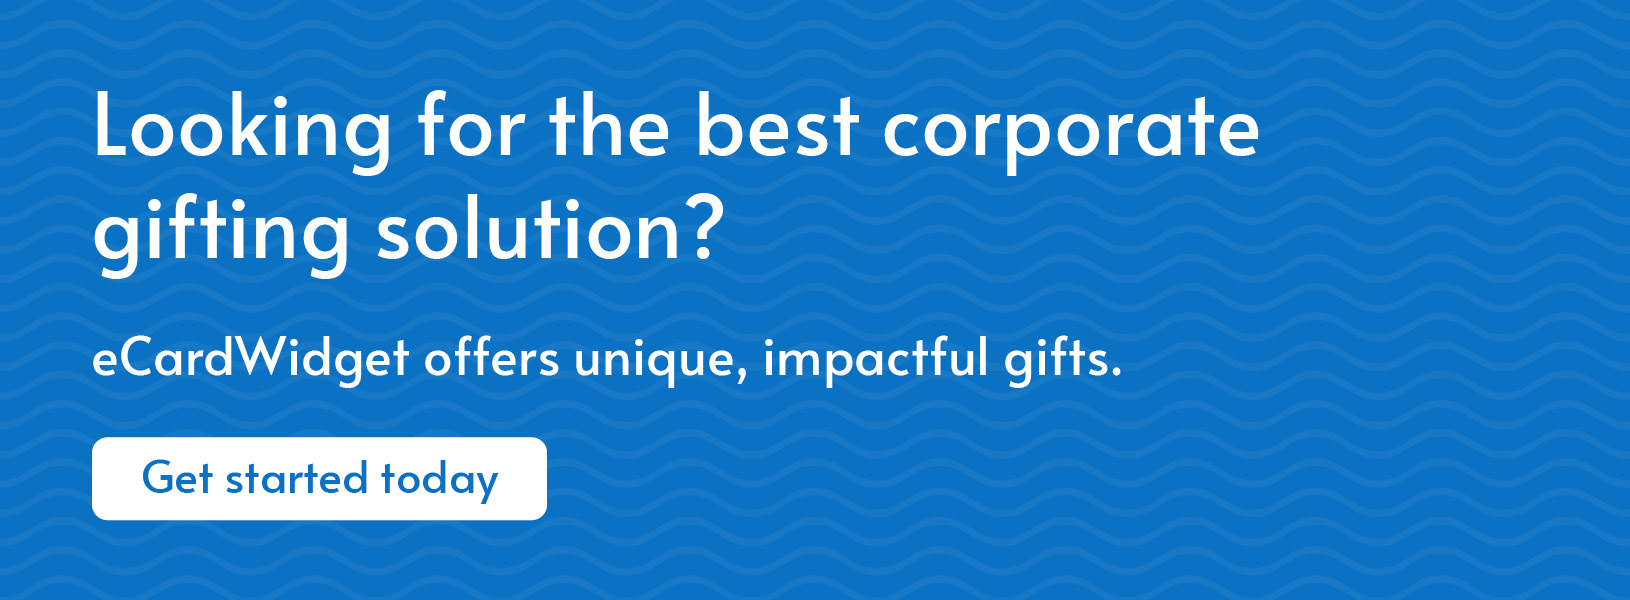 Click through to get started with eCardWidget, our top recommendation for the best corporate gifting companies.